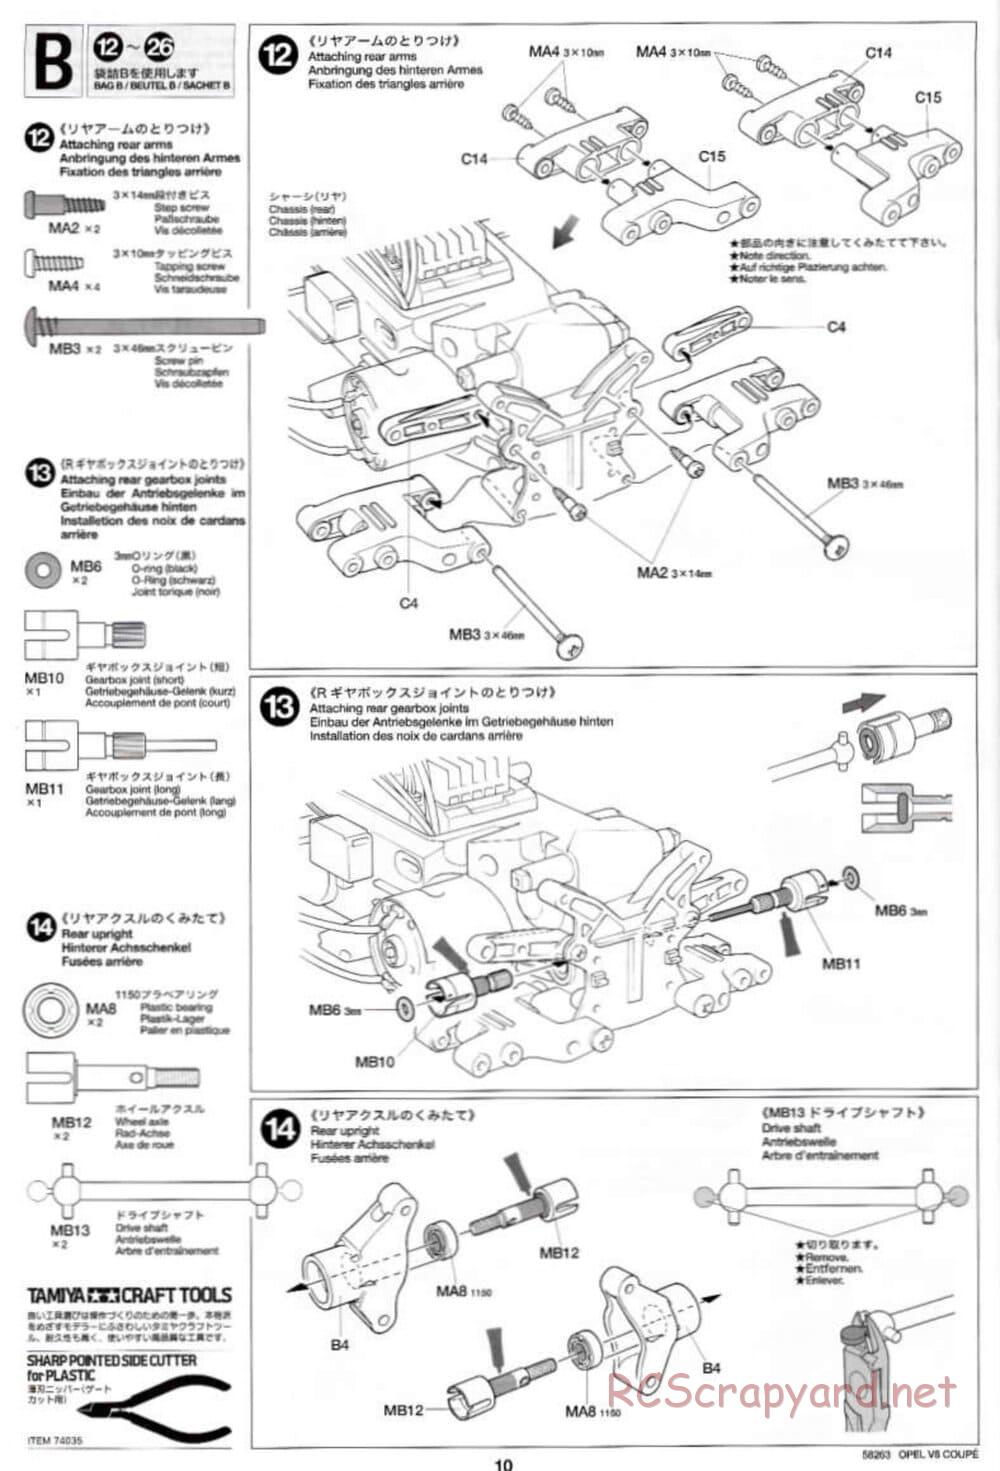 Tamiya - Opel V8 Coupe - TL-01 Chassis - Manual - Page 10